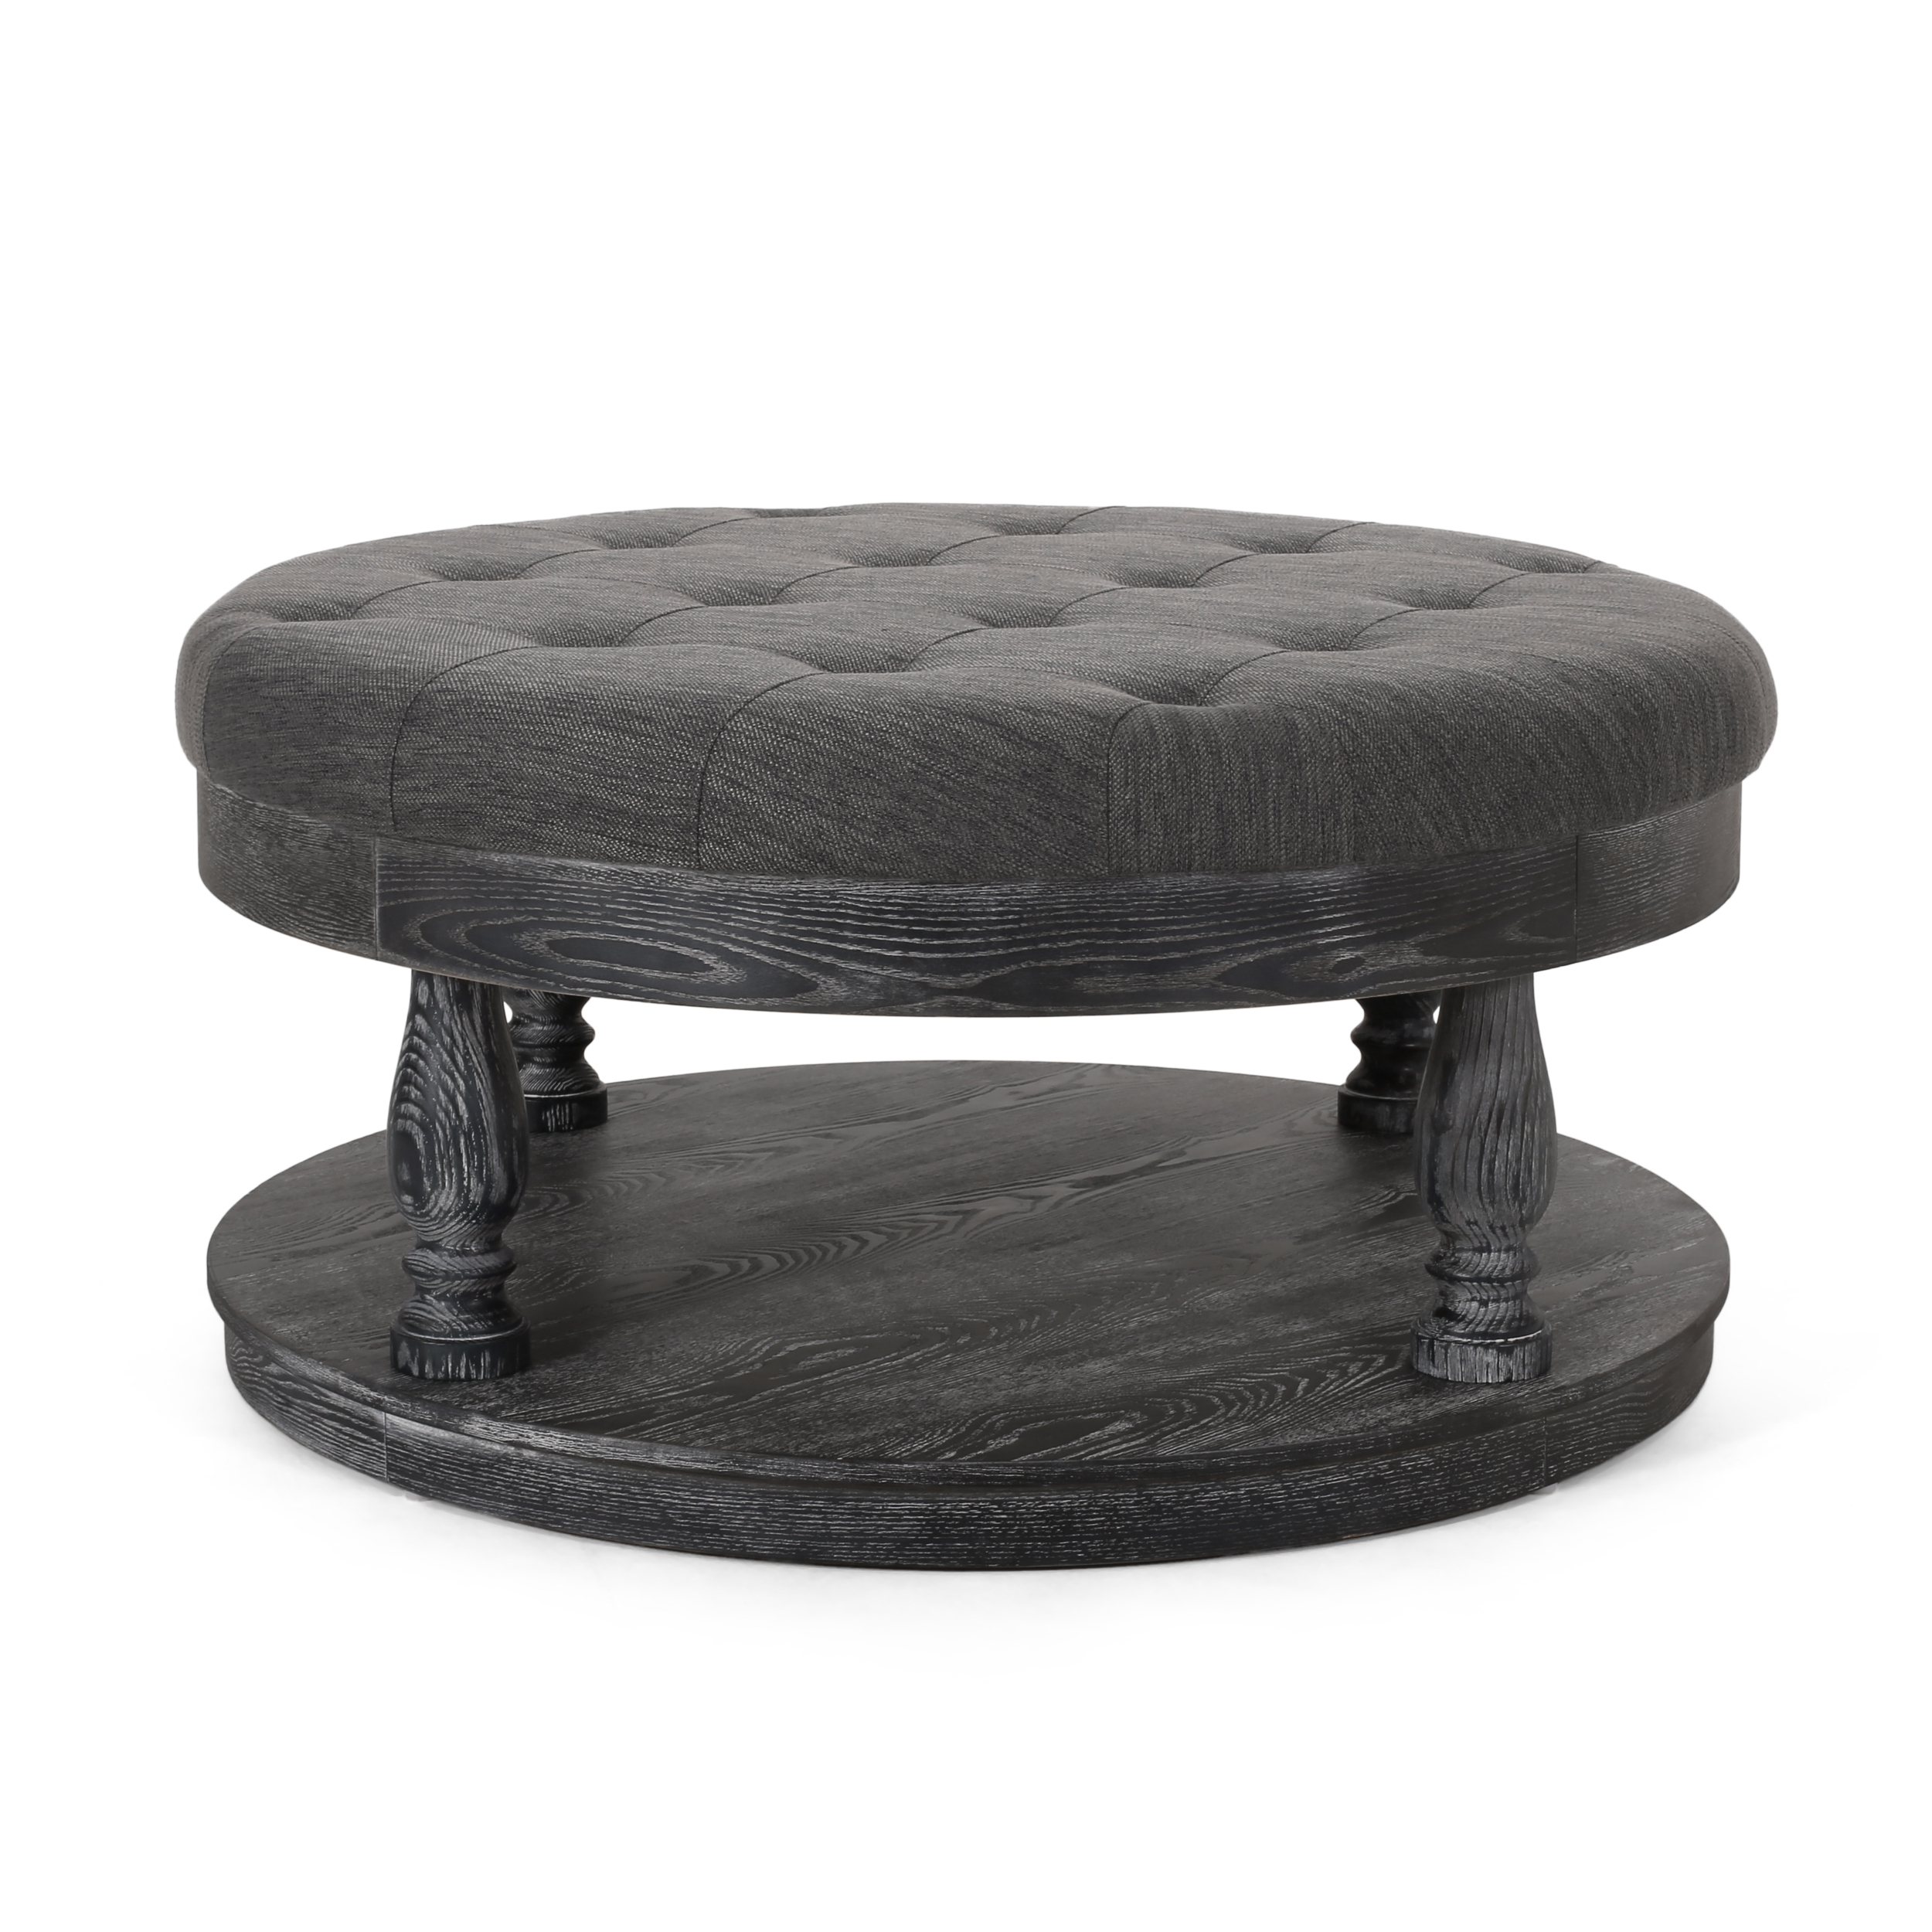 Andrue Contemporary Upholstered Round Ottoman - Gray/charcoal